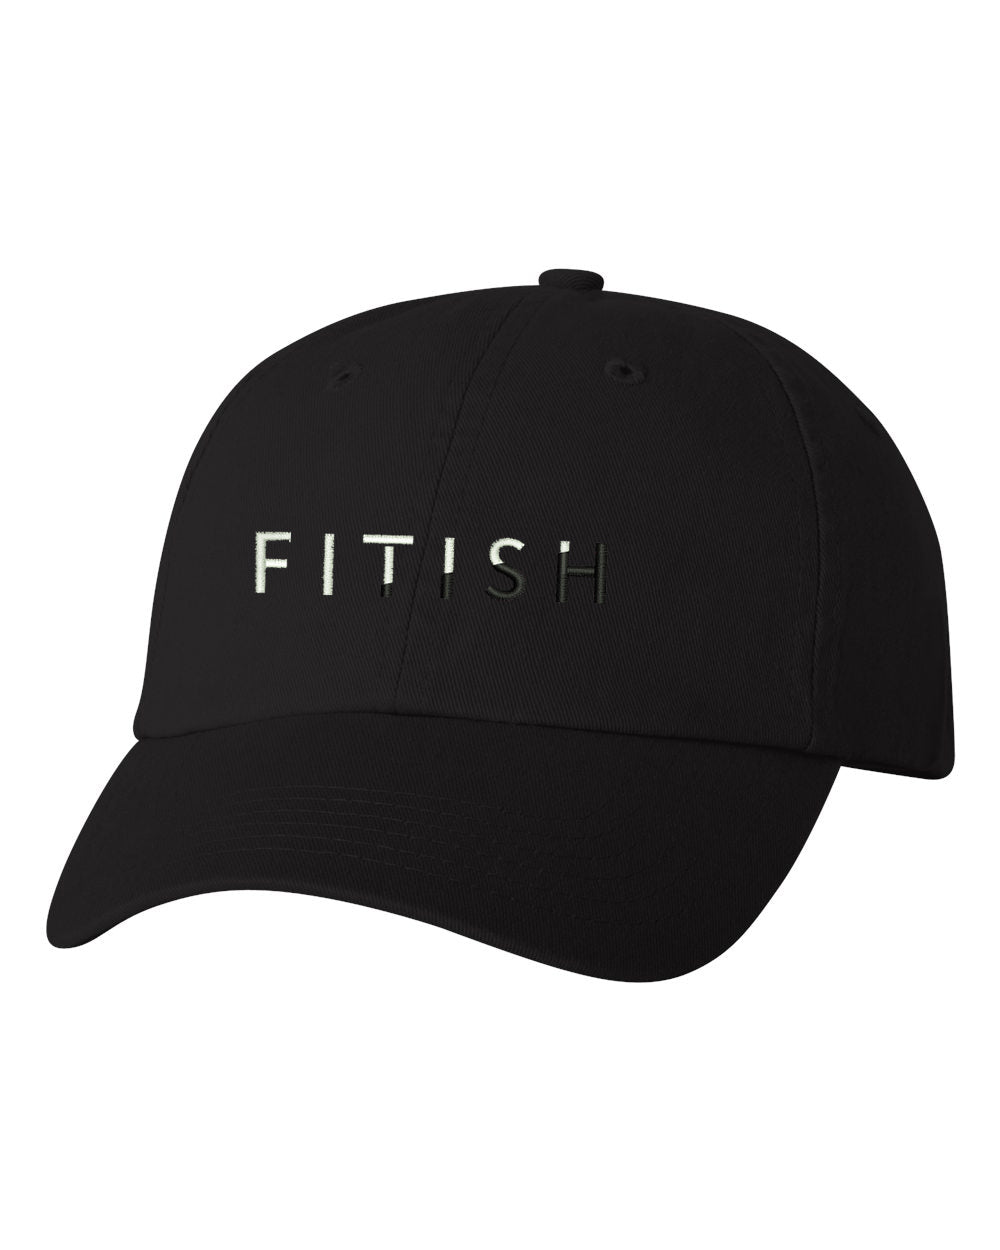 FITISH DAD HAT - The Fitish